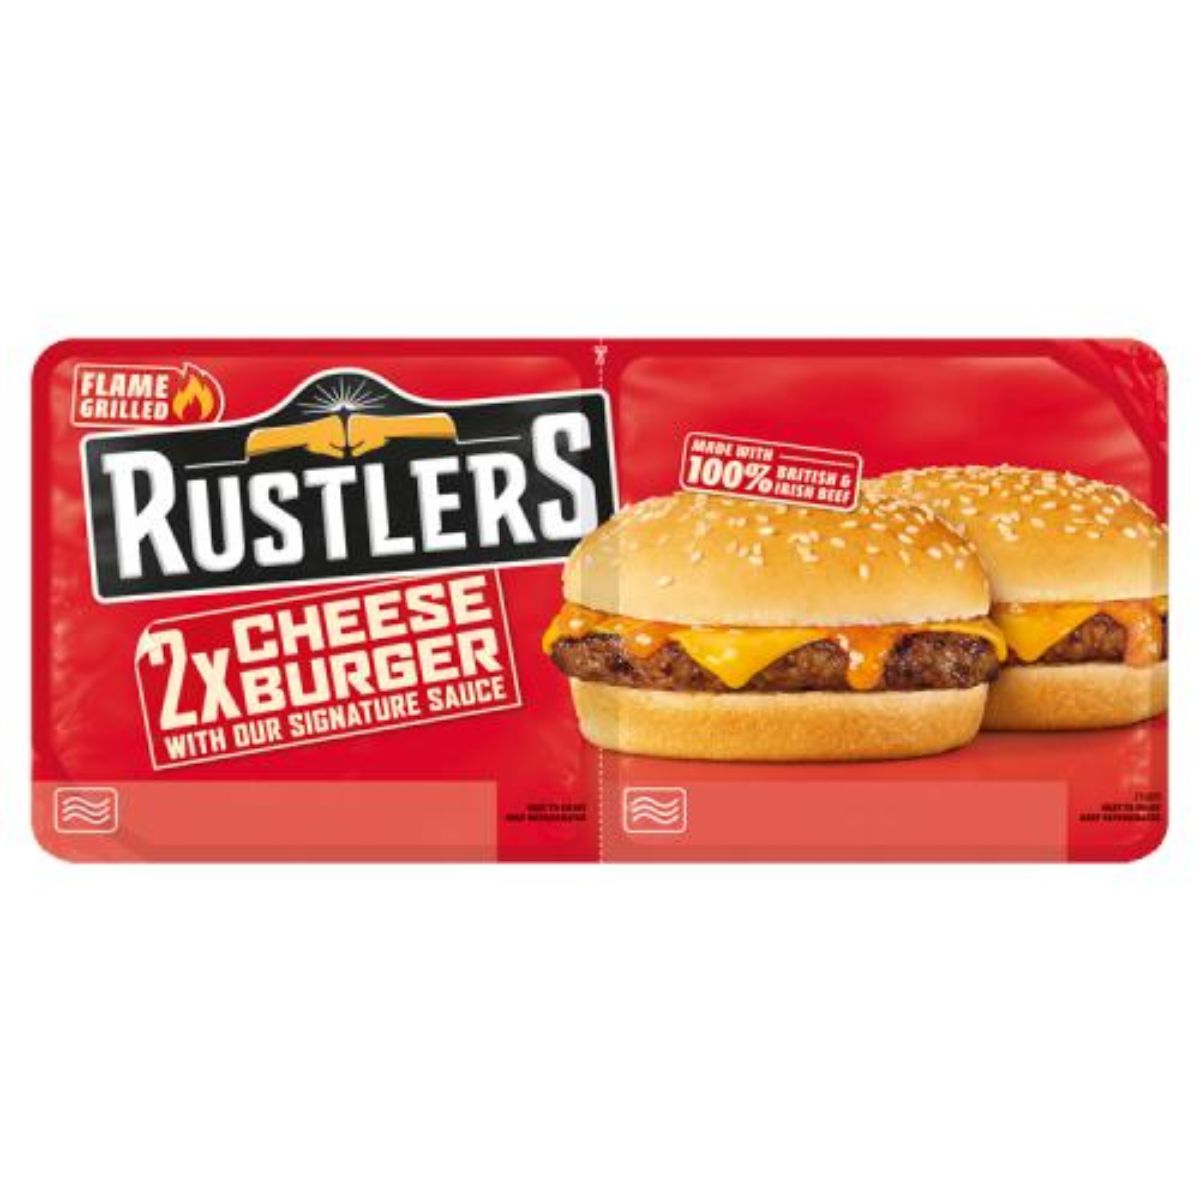 Rustlers - 2 Flame Grilled Cheese Burger - 264g cheese burgers.